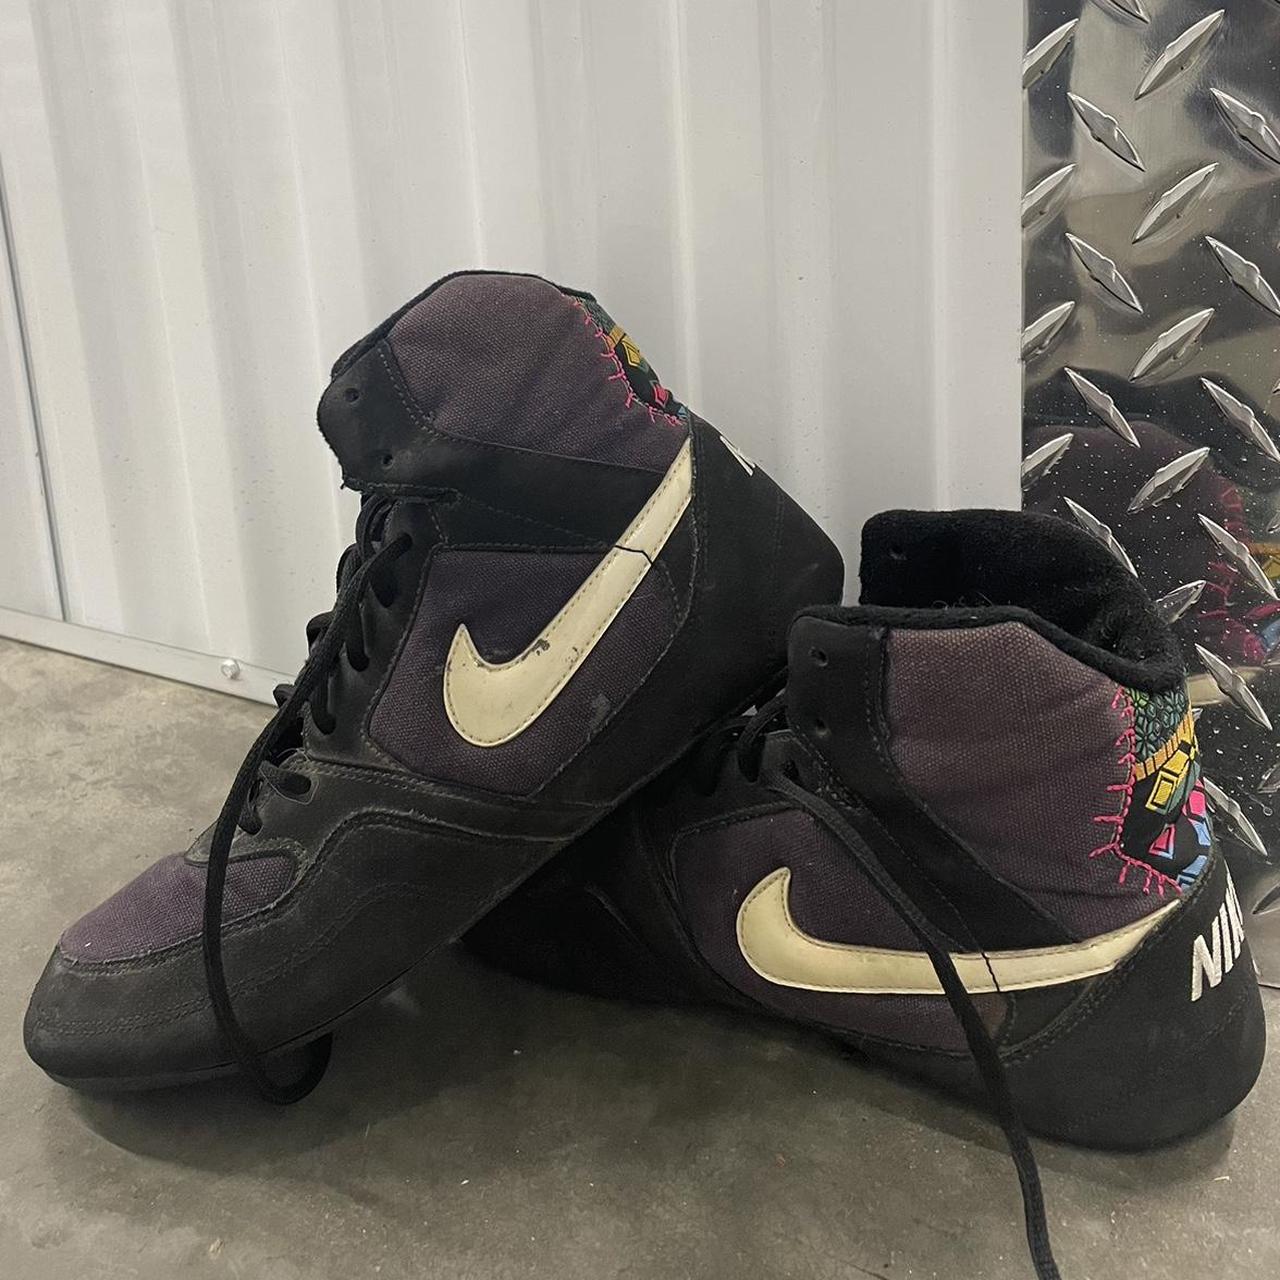 Nike Greco Supreme wrestling/boxing shoes Size 9.5...